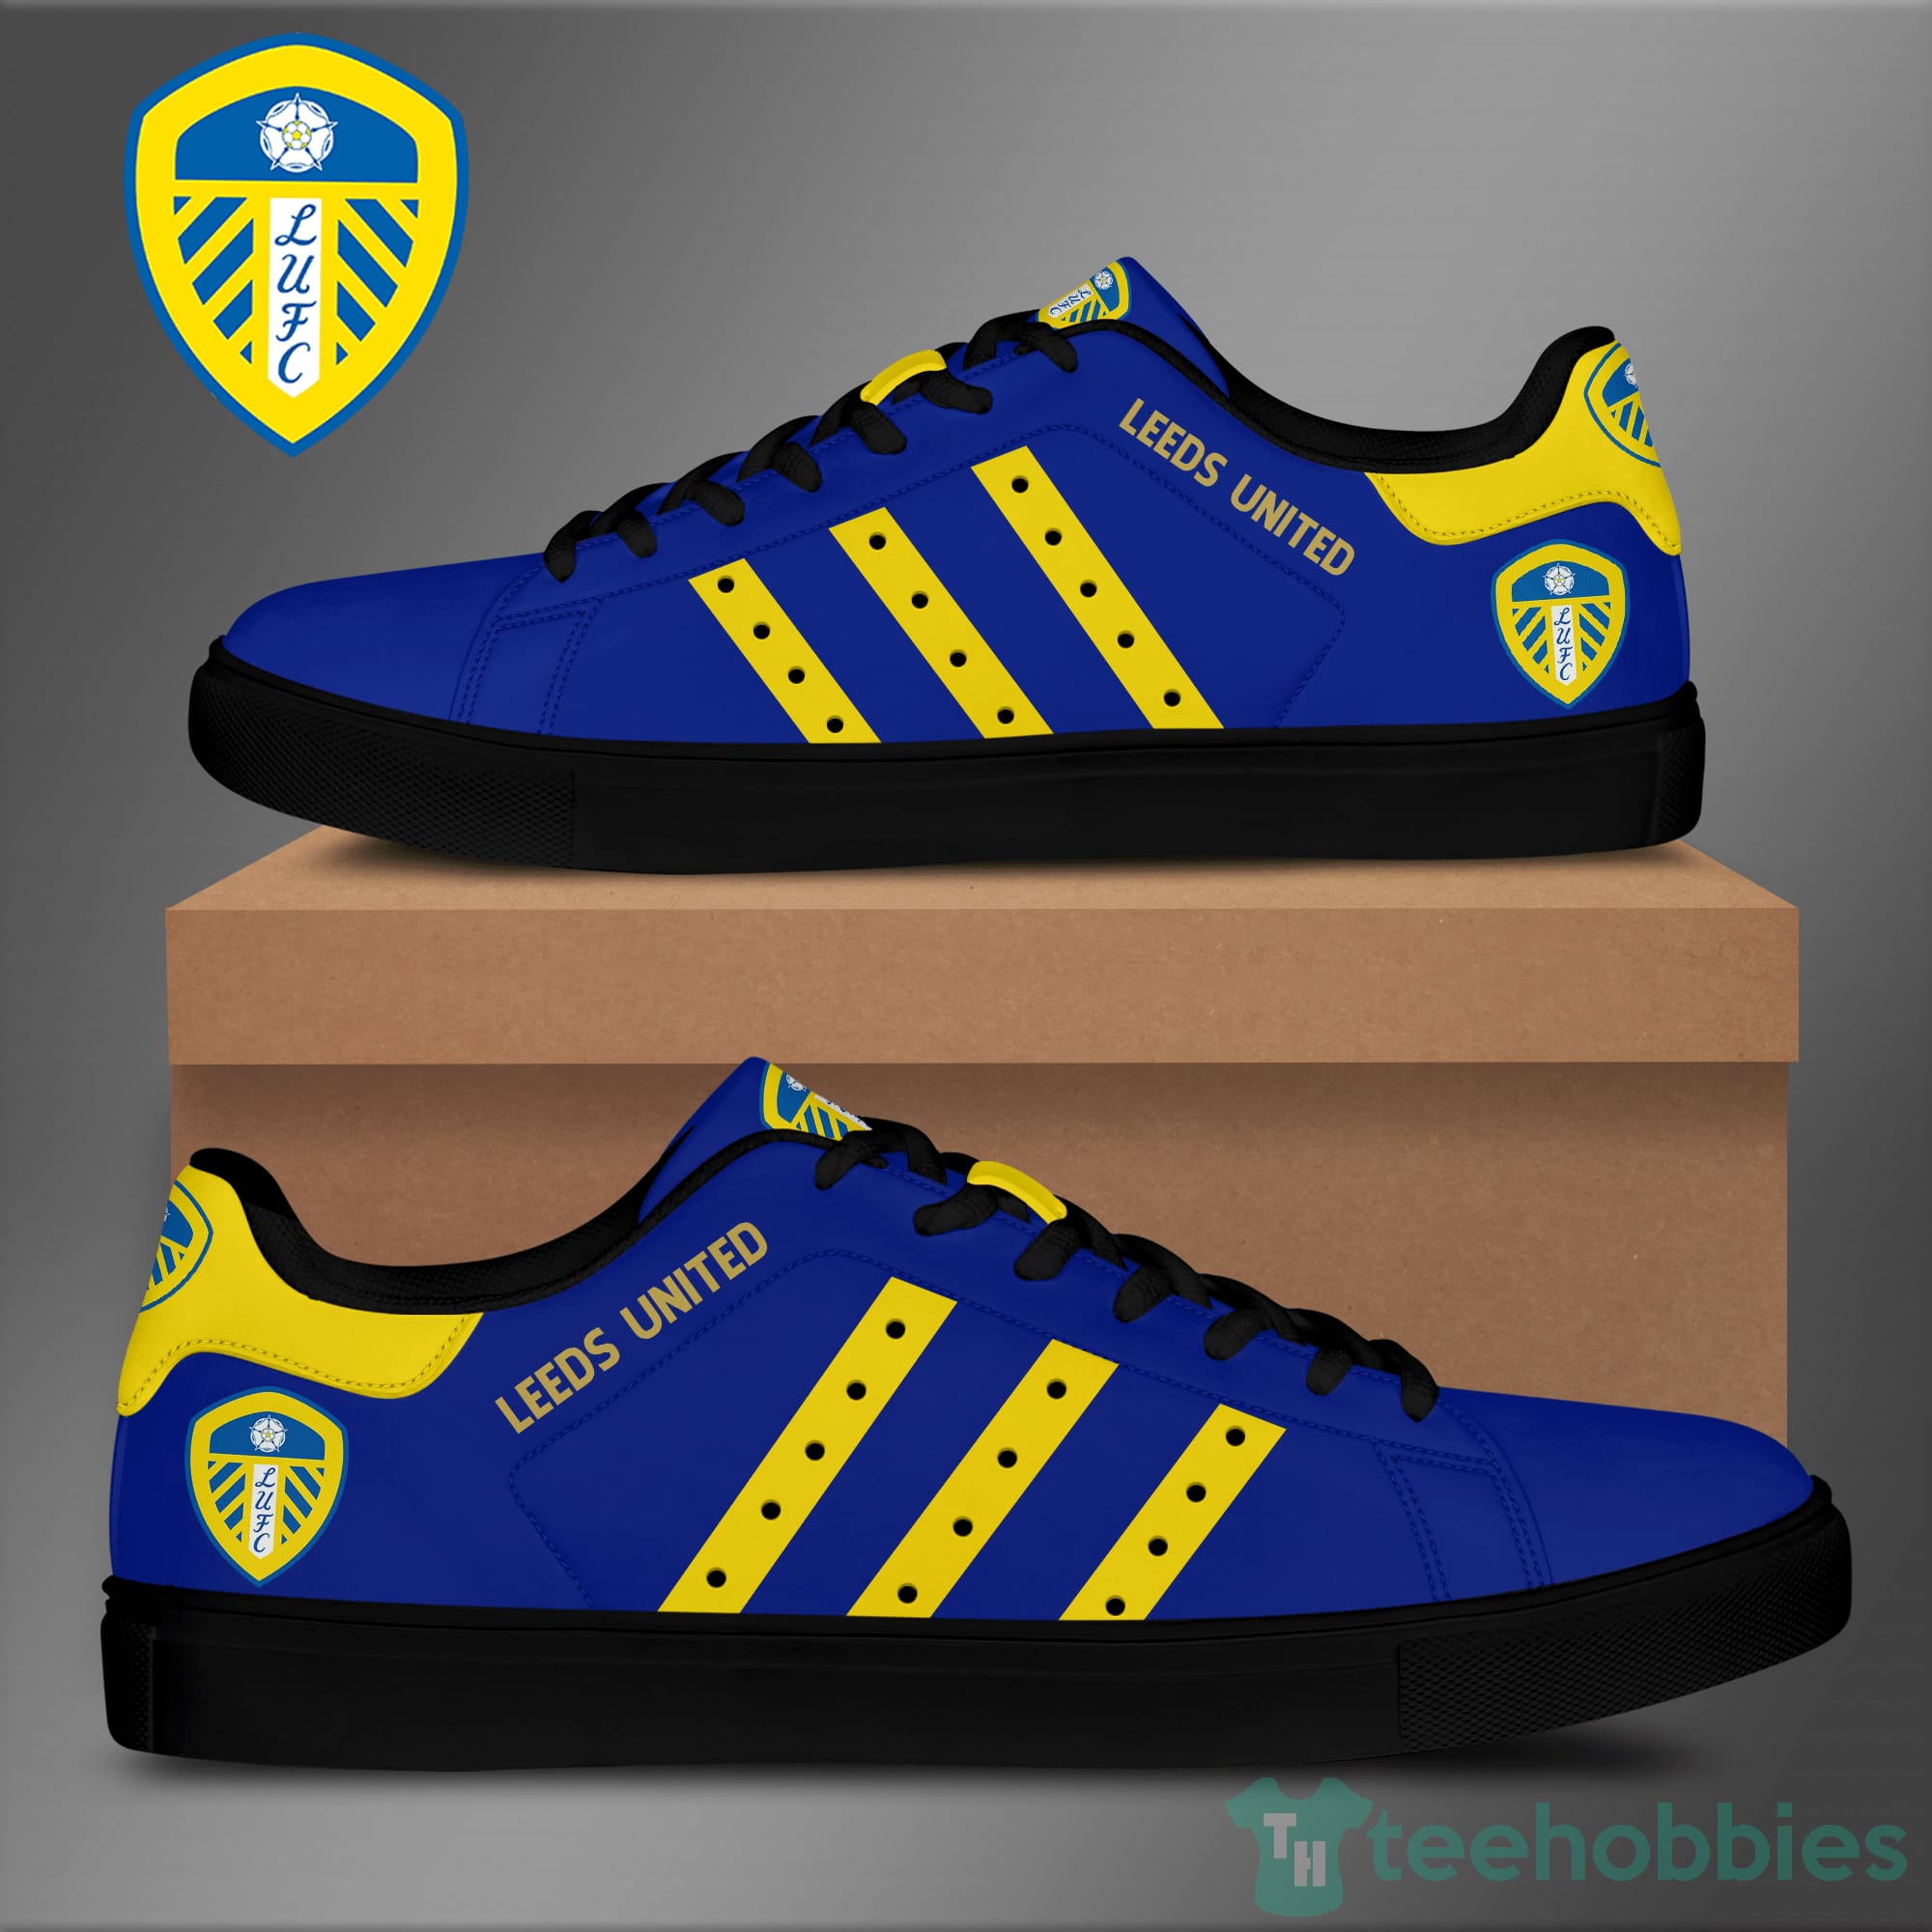 Leeds United Low Top Skate Shoes Product photo 2